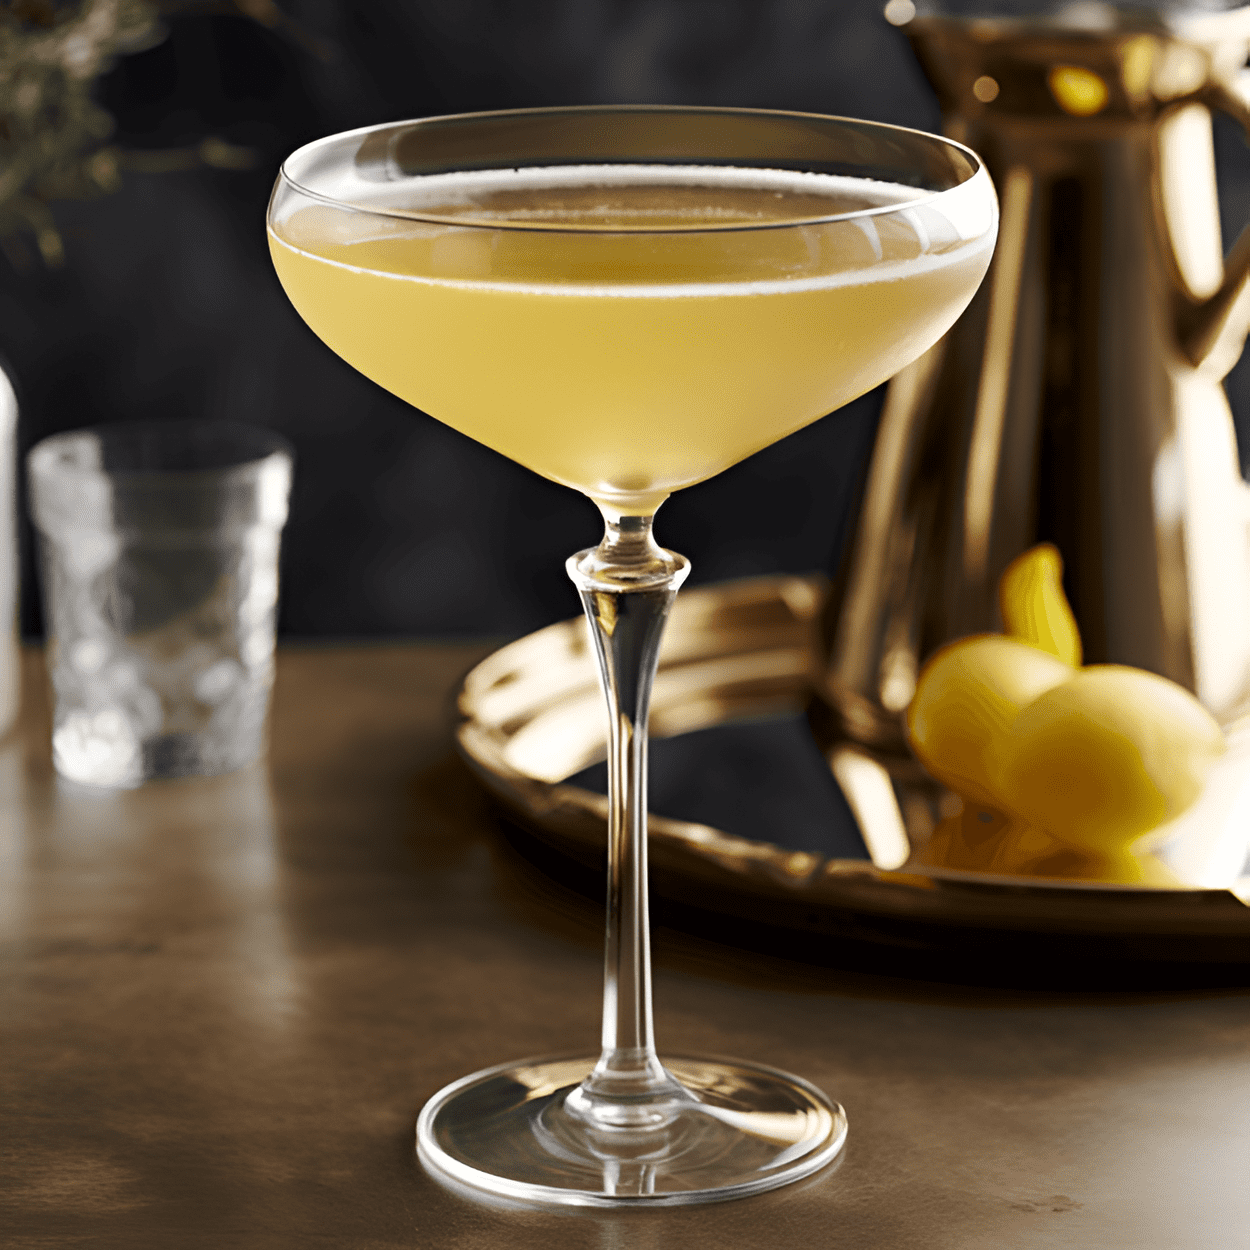 Touchdown Cocktail Recipe - The Touchdown cocktail is a delightful mix of sweet, sour, and strong. The apple brandy brings a sweet, fruity flavor, while the vermouth adds a layer of complexity. The lemon juice cuts through the sweetness, adding a tart, refreshing note. It's a well-balanced drink that's perfect for any occasion.